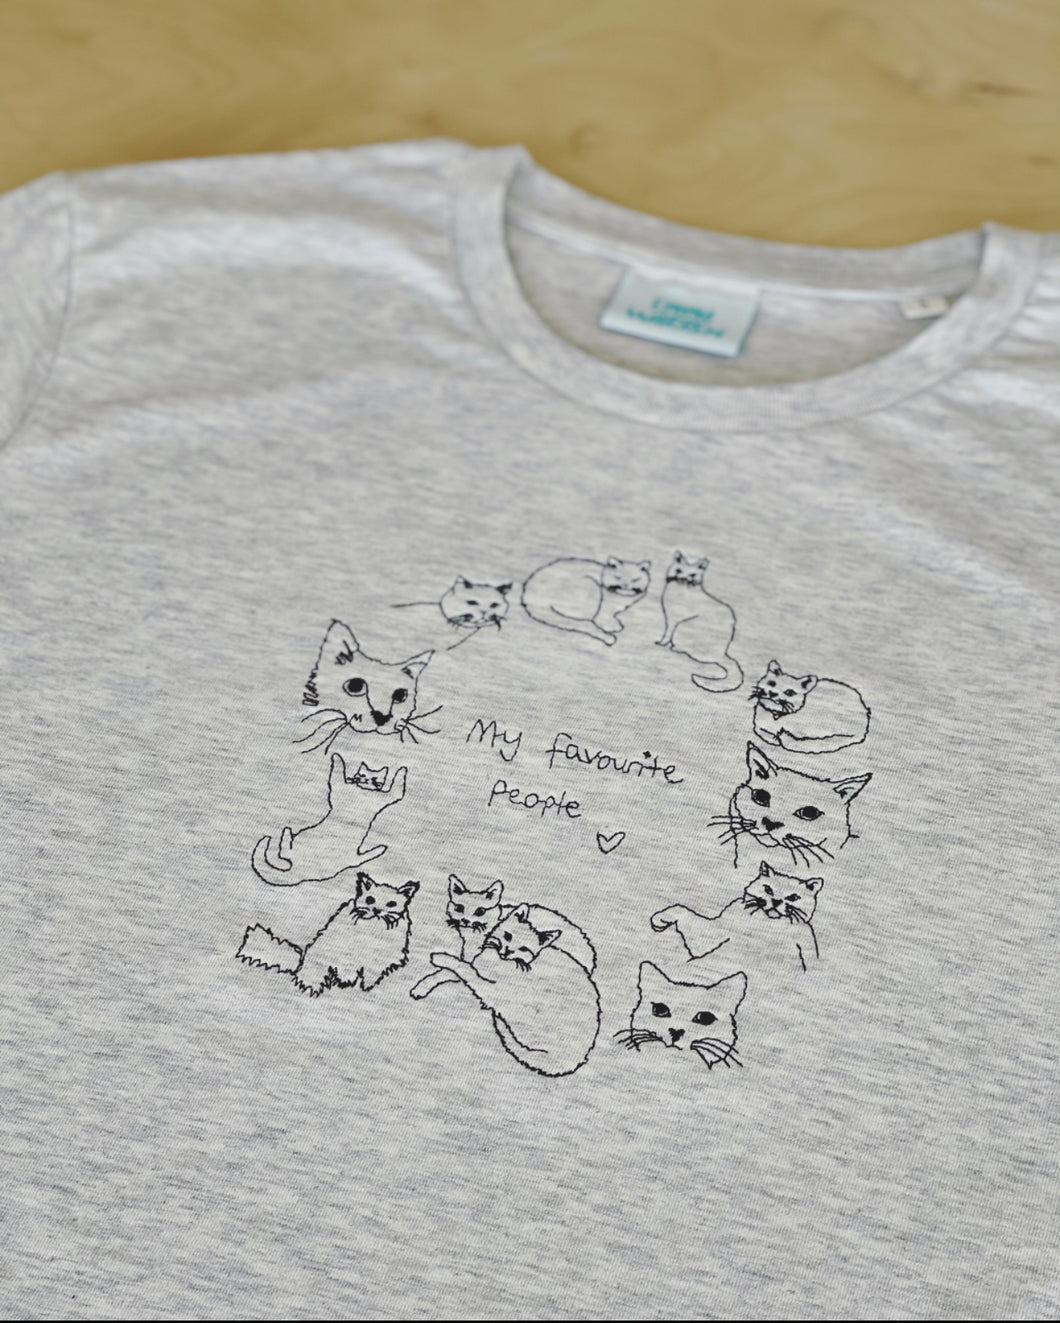 My favourite people Cat embroidery embroidered organic t-shirt.